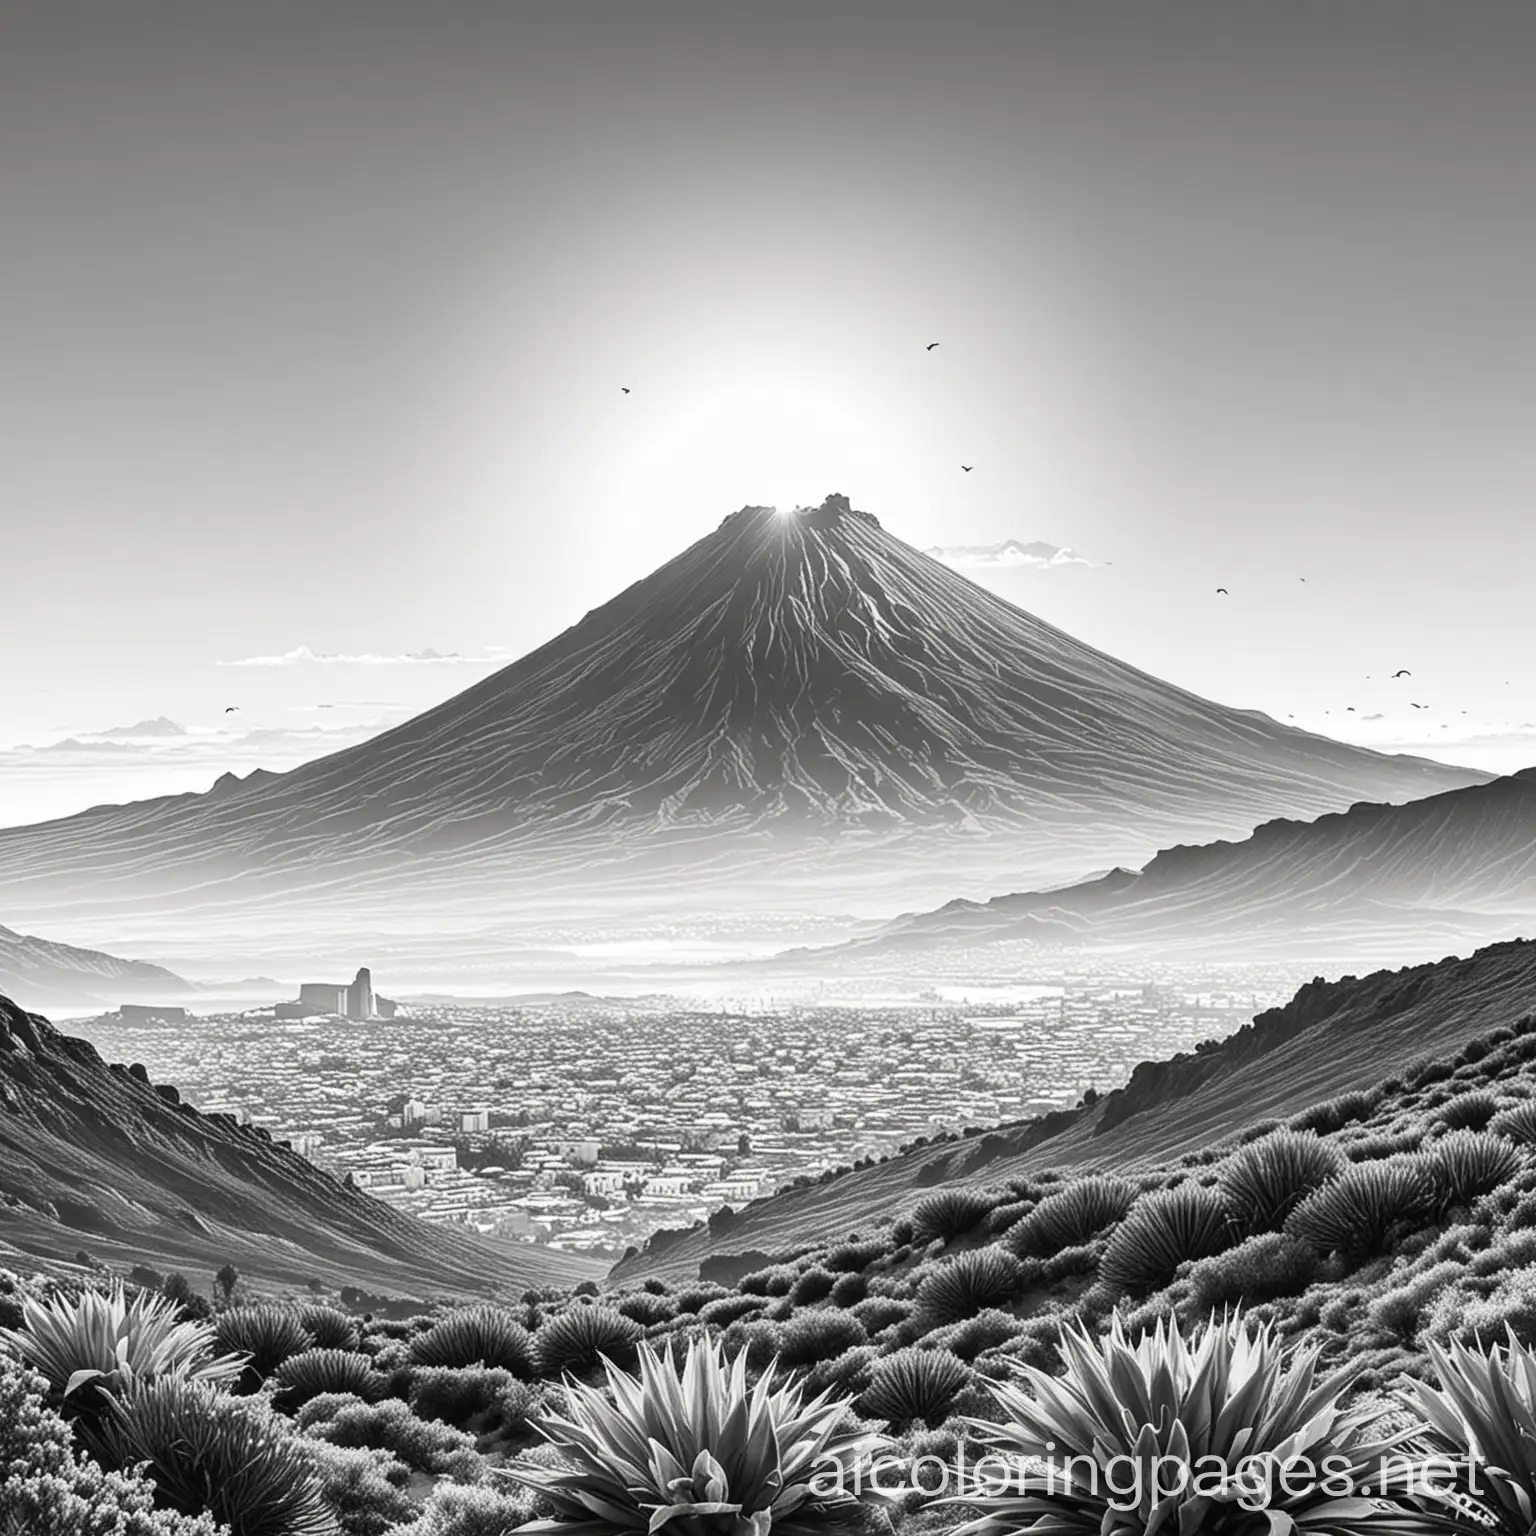 amanecer de canarias que se vea el Teide de Tenerife

, Coloring Page, black and white, line art, white background, Simplicity, Ample White Space. The background of the coloring page is plain white to make it easy for young children to color within the lines. The outlines of all the subjects are easy to distinguish, making it simple for kids to color without too much difficulty